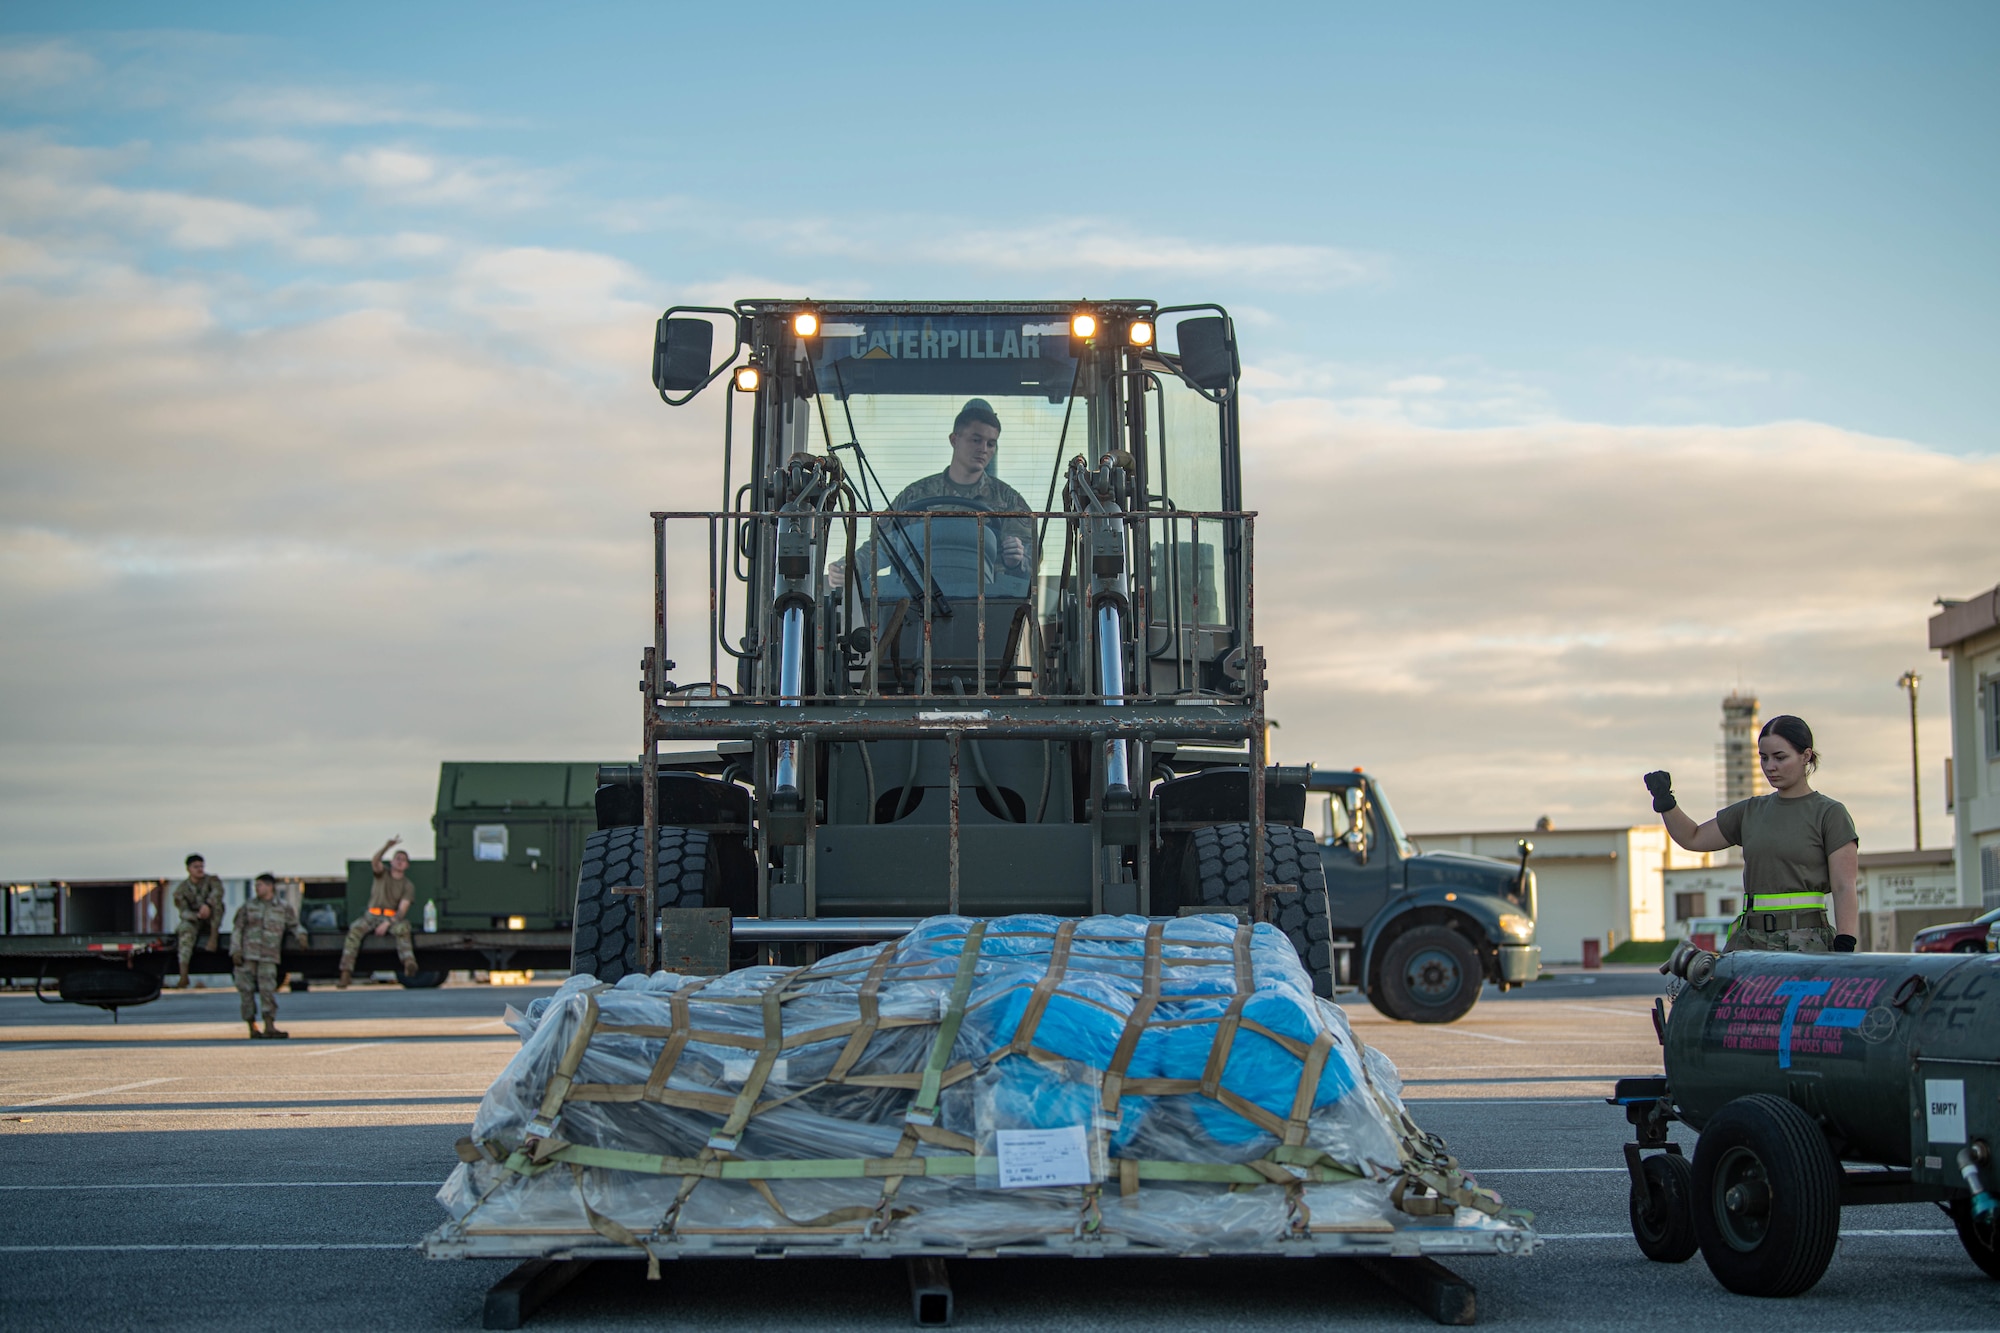 One Airman drives a fork lift with a pallet on it while another Airman guides them.